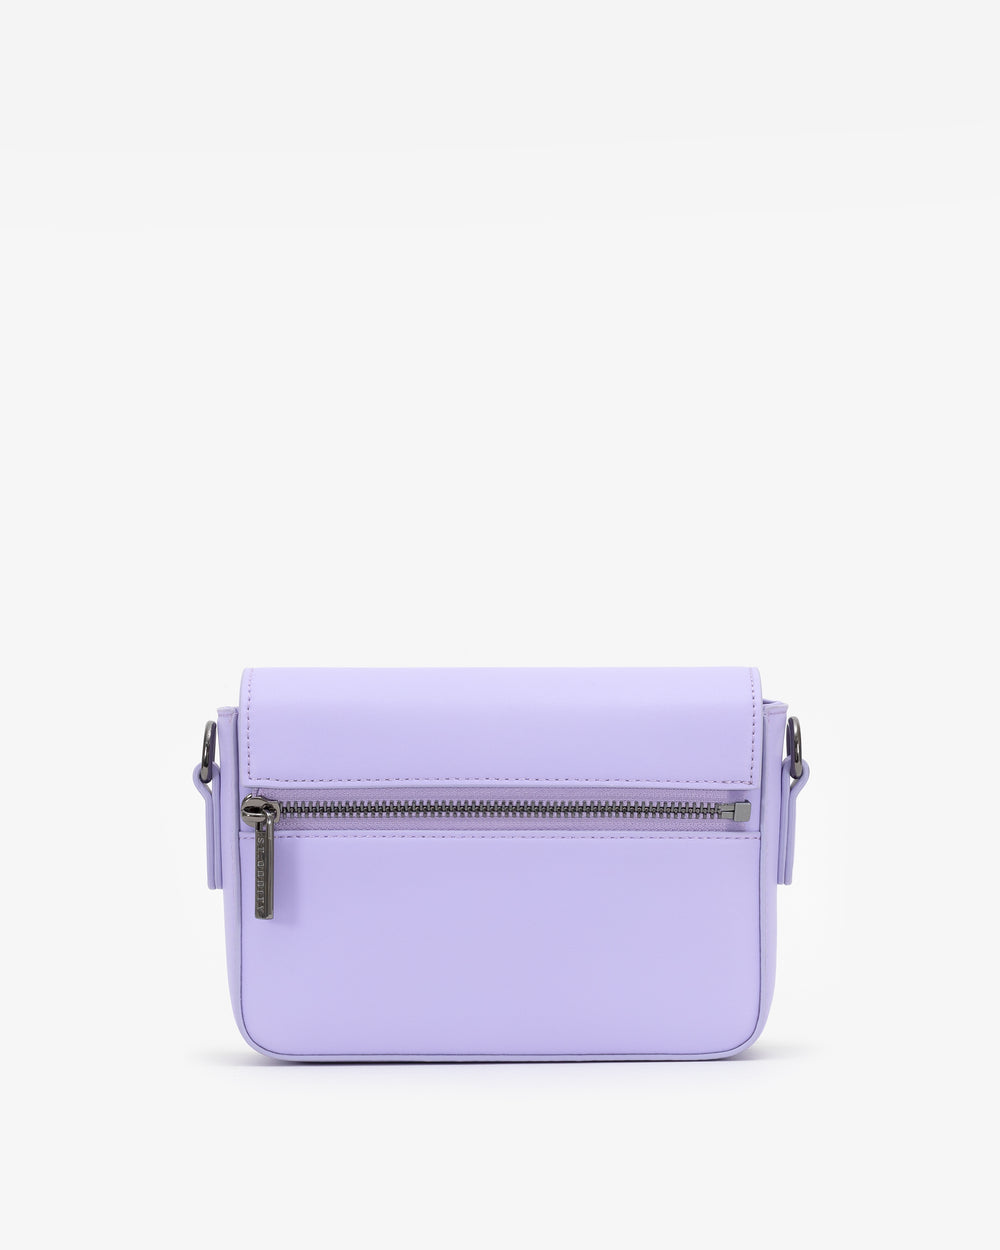 Crossbody Bag with Street Strap in Lavender